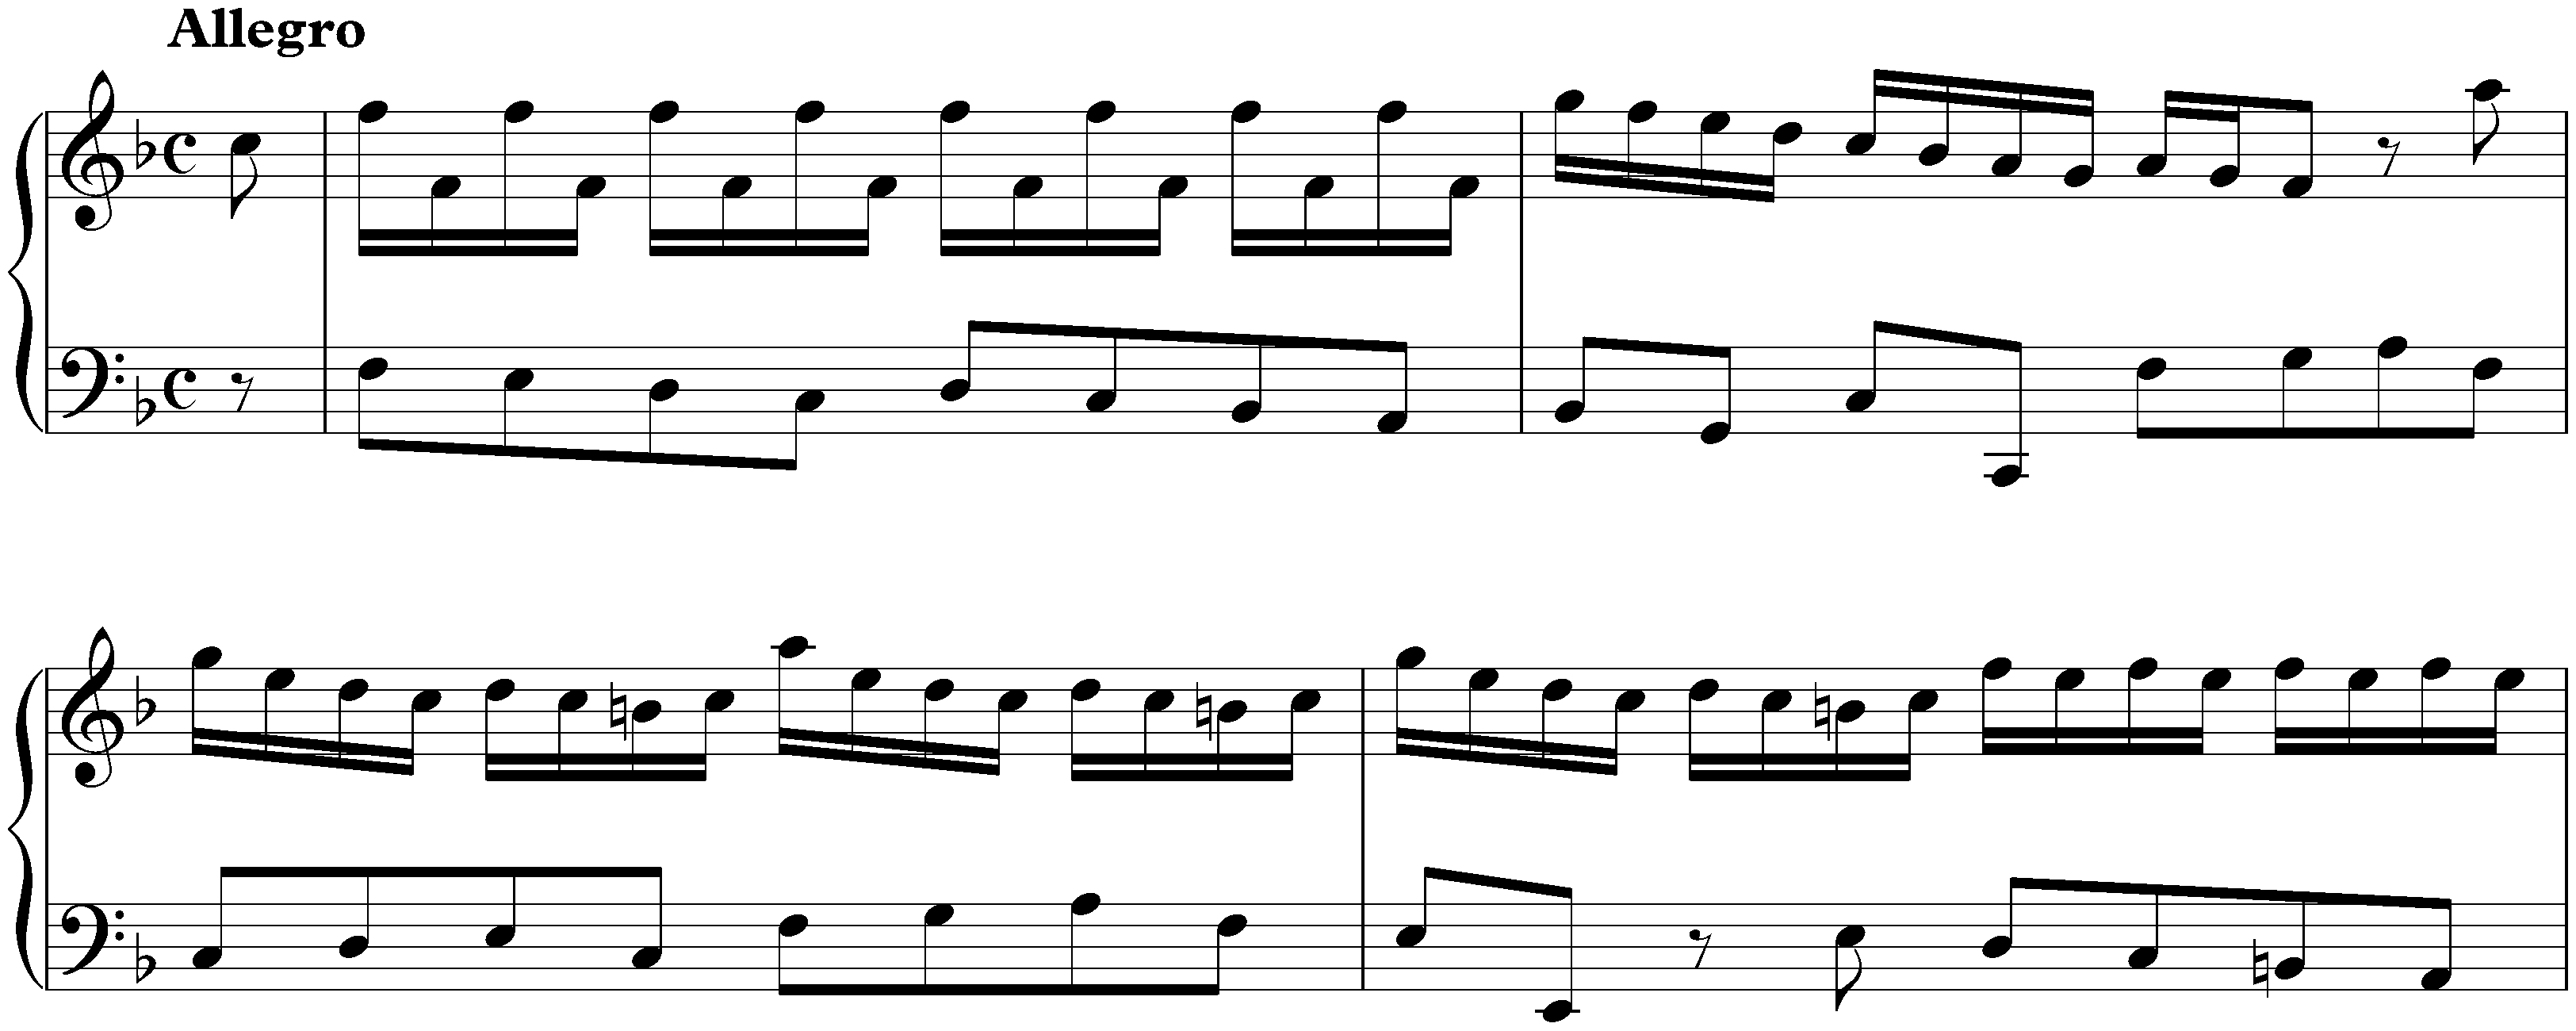 Sonatas published by Boivin; 2. F major